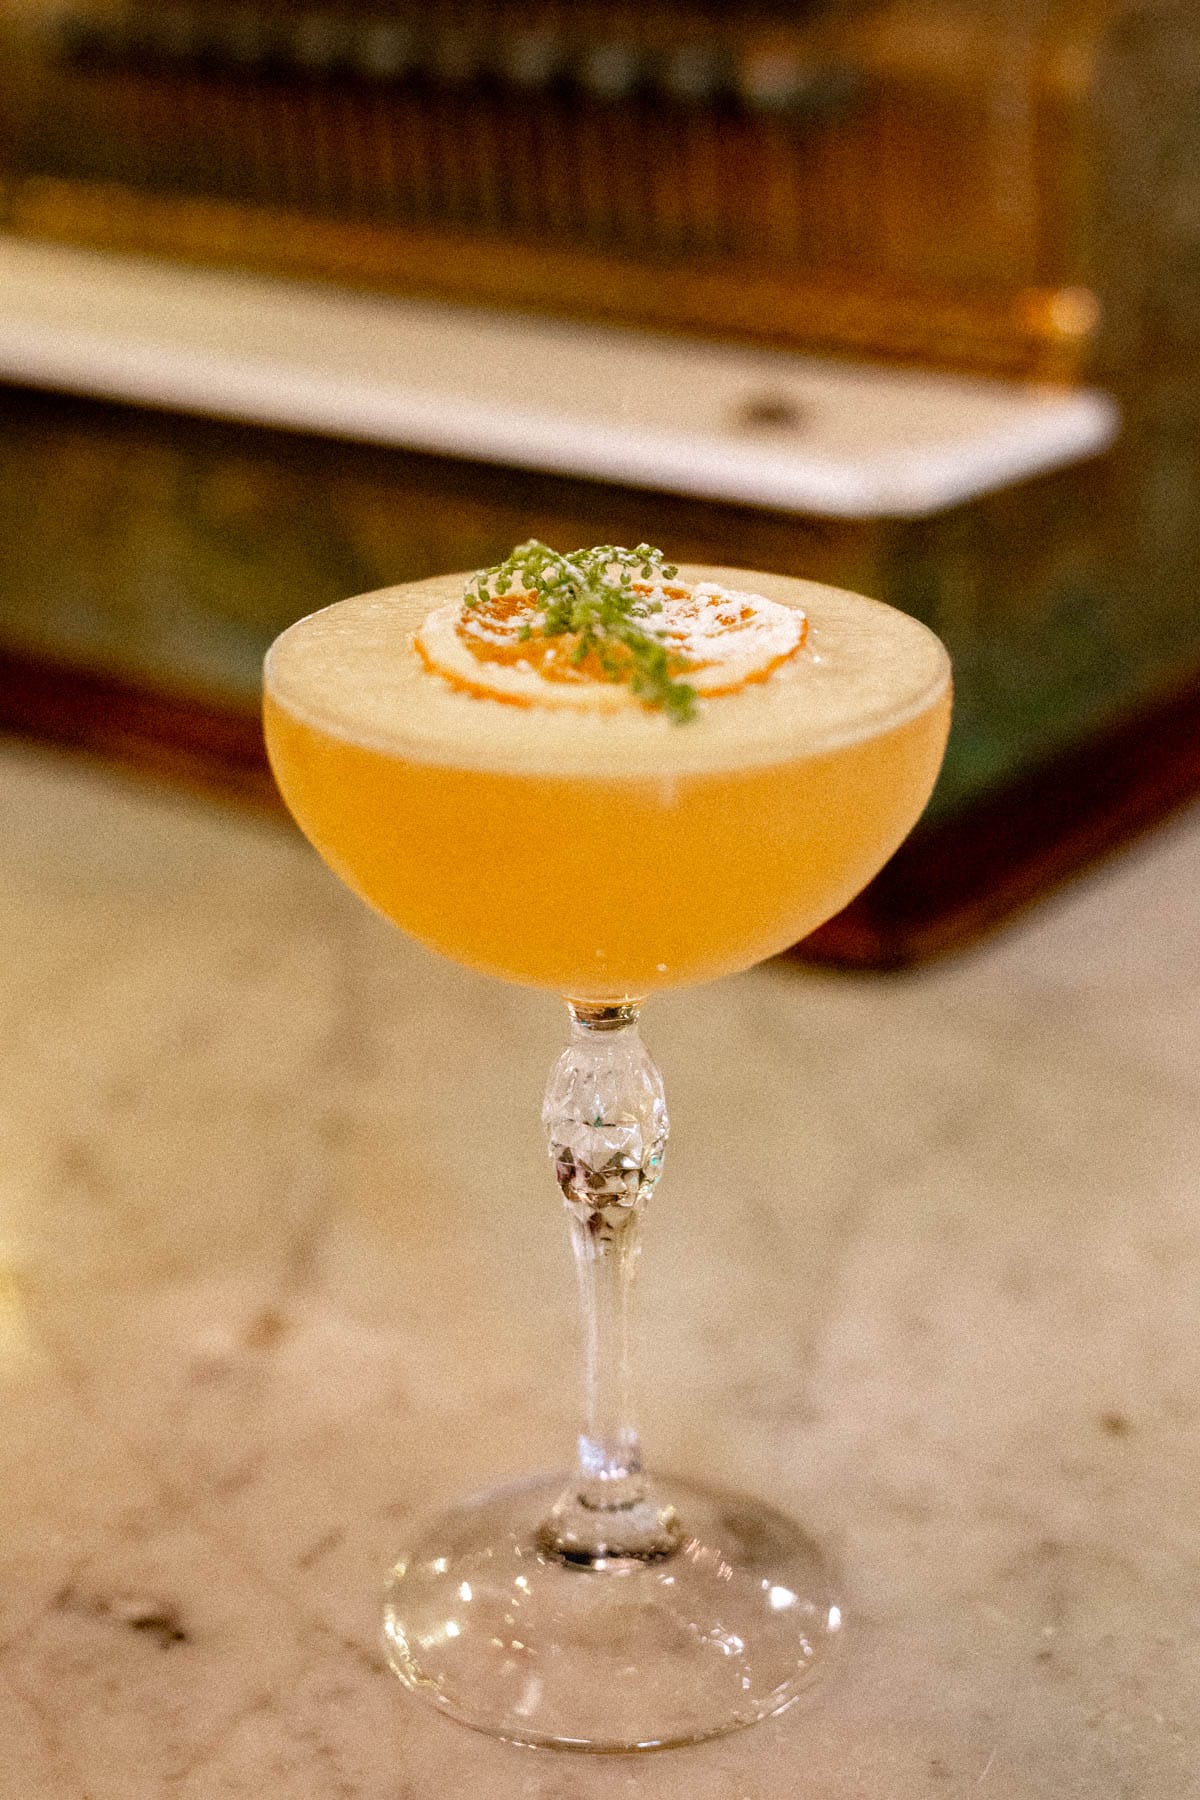 Oscar Wilde Cocktail Best things to do in New York City in the Fall
Best Halloween Bars NYC